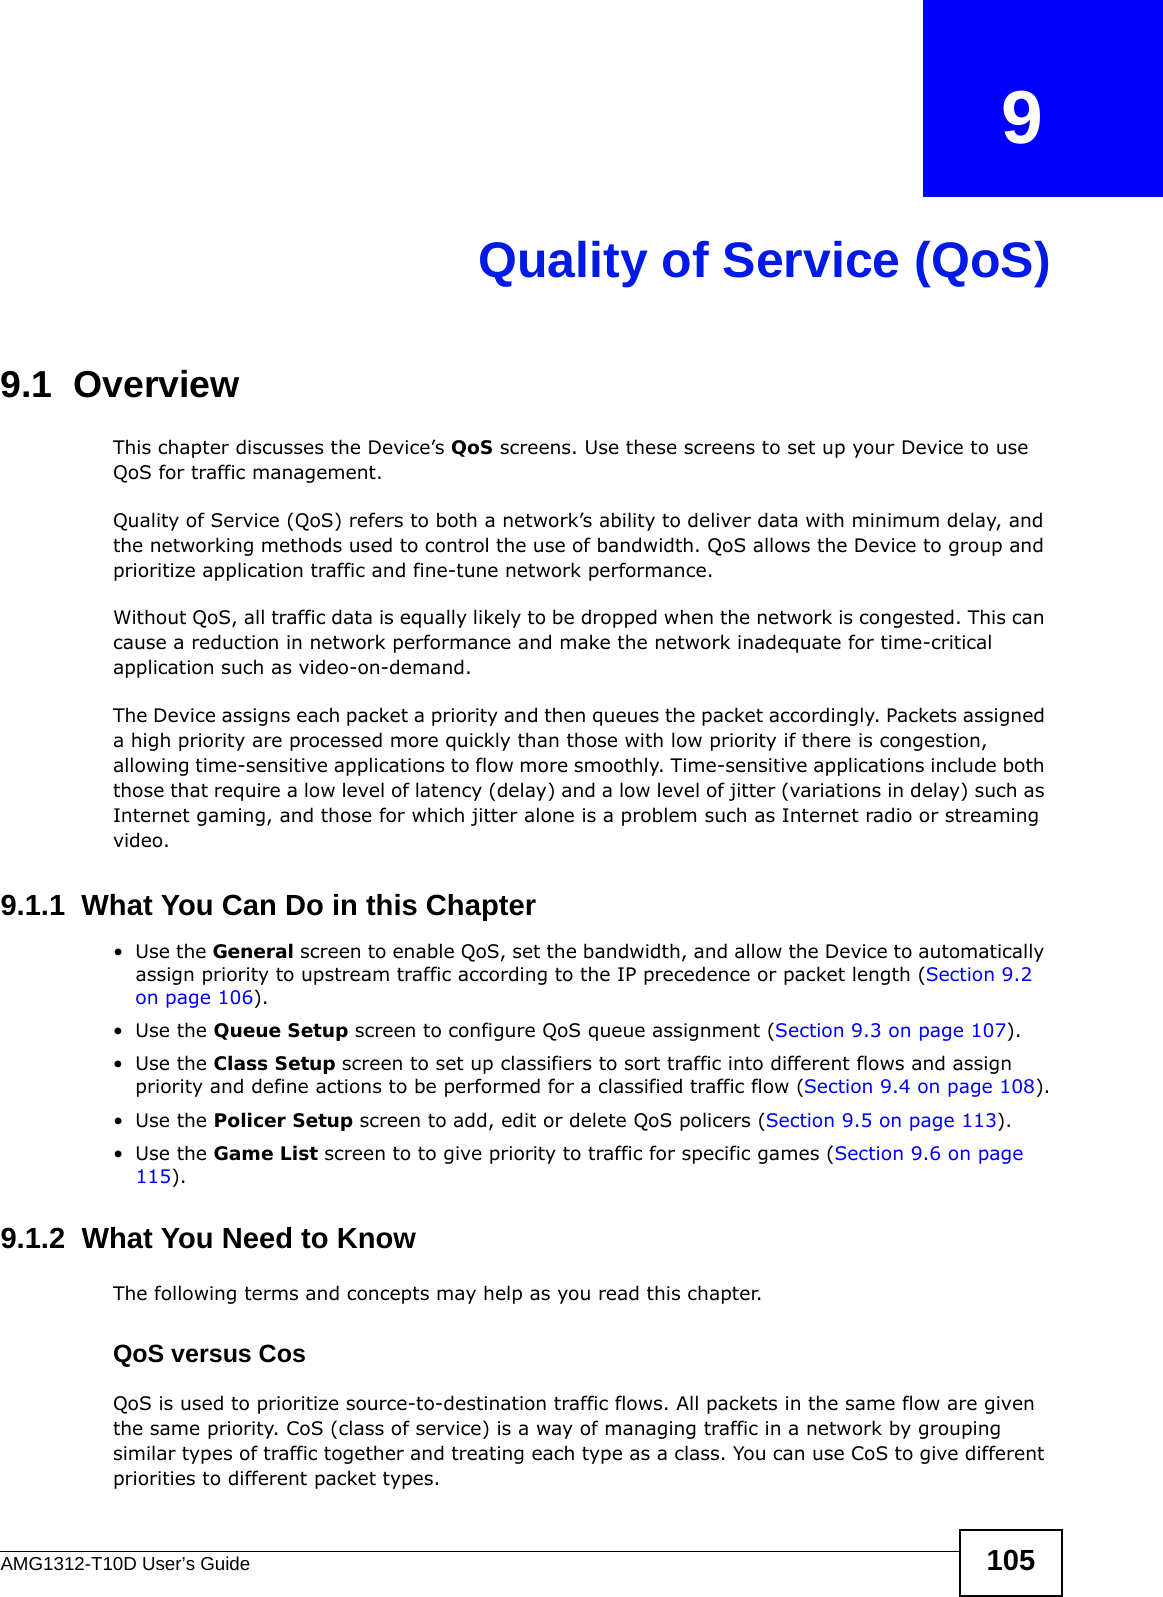 AMG1312-T10D User’s Guide 105CHAPTER   9Quality of Service (QoS)9.1  OverviewThis chapter discusses the Device’s QoS screens. Use these screens to set up your Device to use QoS for traffic management. Quality of Service (QoS) refers to both a network’s ability to deliver data with minimum delay, and the networking methods used to control the use of bandwidth. QoS allows the Device to group and prioritize application traffic and fine-tune network performance. Without QoS, all traffic data is equally likely to be dropped when the network is congested. This can cause a reduction in network performance and make the network inadequate for time-critical application such as video-on-demand.The Device assigns each packet a priority and then queues the packet accordingly. Packets assigned a high priority are processed more quickly than those with low priority if there is congestion, allowing time-sensitive applications to flow more smoothly. Time-sensitive applications include both those that require a low level of latency (delay) and a low level of jitter (variations in delay) such as Internet gaming, and those for which jitter alone is a problem such as Internet radio or streaming video.9.1.1  What You Can Do in this Chapter•Use the General screen to enable QoS, set the bandwidth, and allow the Device to automatically assign priority to upstream traffic according to the IP precedence or packet length (Section 9.2 on page 106).•Use the Queue Setup screen to configure QoS queue assignment (Section 9.3 on page 107).•Use the Class Setup screen to set up classifiers to sort traffic into different flows and assign priority and define actions to be performed for a classified traffic flow (Section 9.4 on page 108).•Use the Policer Setup screen to add, edit or delete QoS policers (Section 9.5 on page 113).•Use the Game List screen to to give priority to traffic for specific games (Section 9.6 on page 115).9.1.2  What You Need to KnowThe following terms and concepts may help as you read this chapter.QoS versus CosQoS is used to prioritize source-to-destination traffic flows. All packets in the same flow are given the same priority. CoS (class of service) is a way of managing traffic in a network by grouping similar types of traffic together and treating each type as a class. You can use CoS to give different priorities to different packet types. 